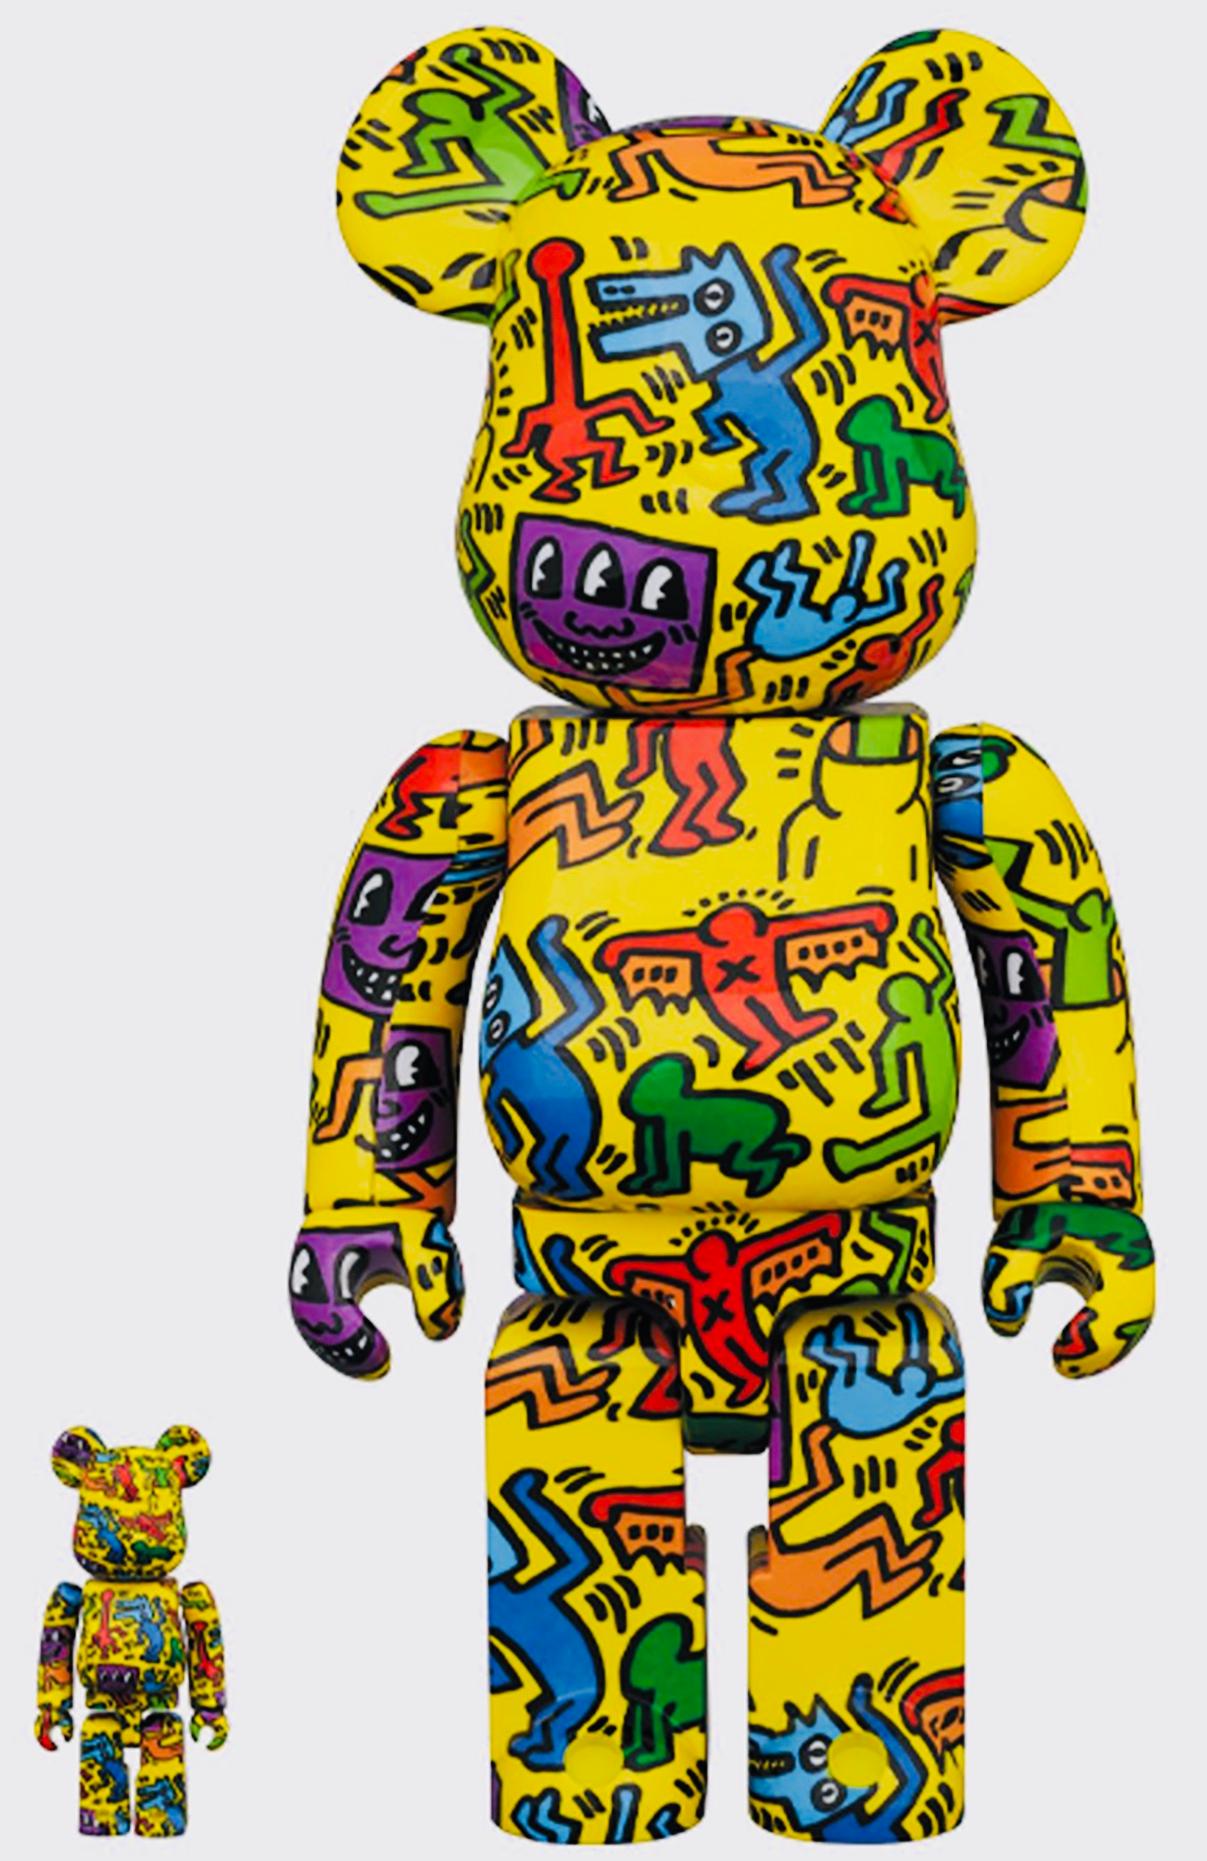 Keith Haring Bearbrick 400 % Companion (Haring BE@RBRICK) - Noir Figurative Sculpture par (after) Keith Haring